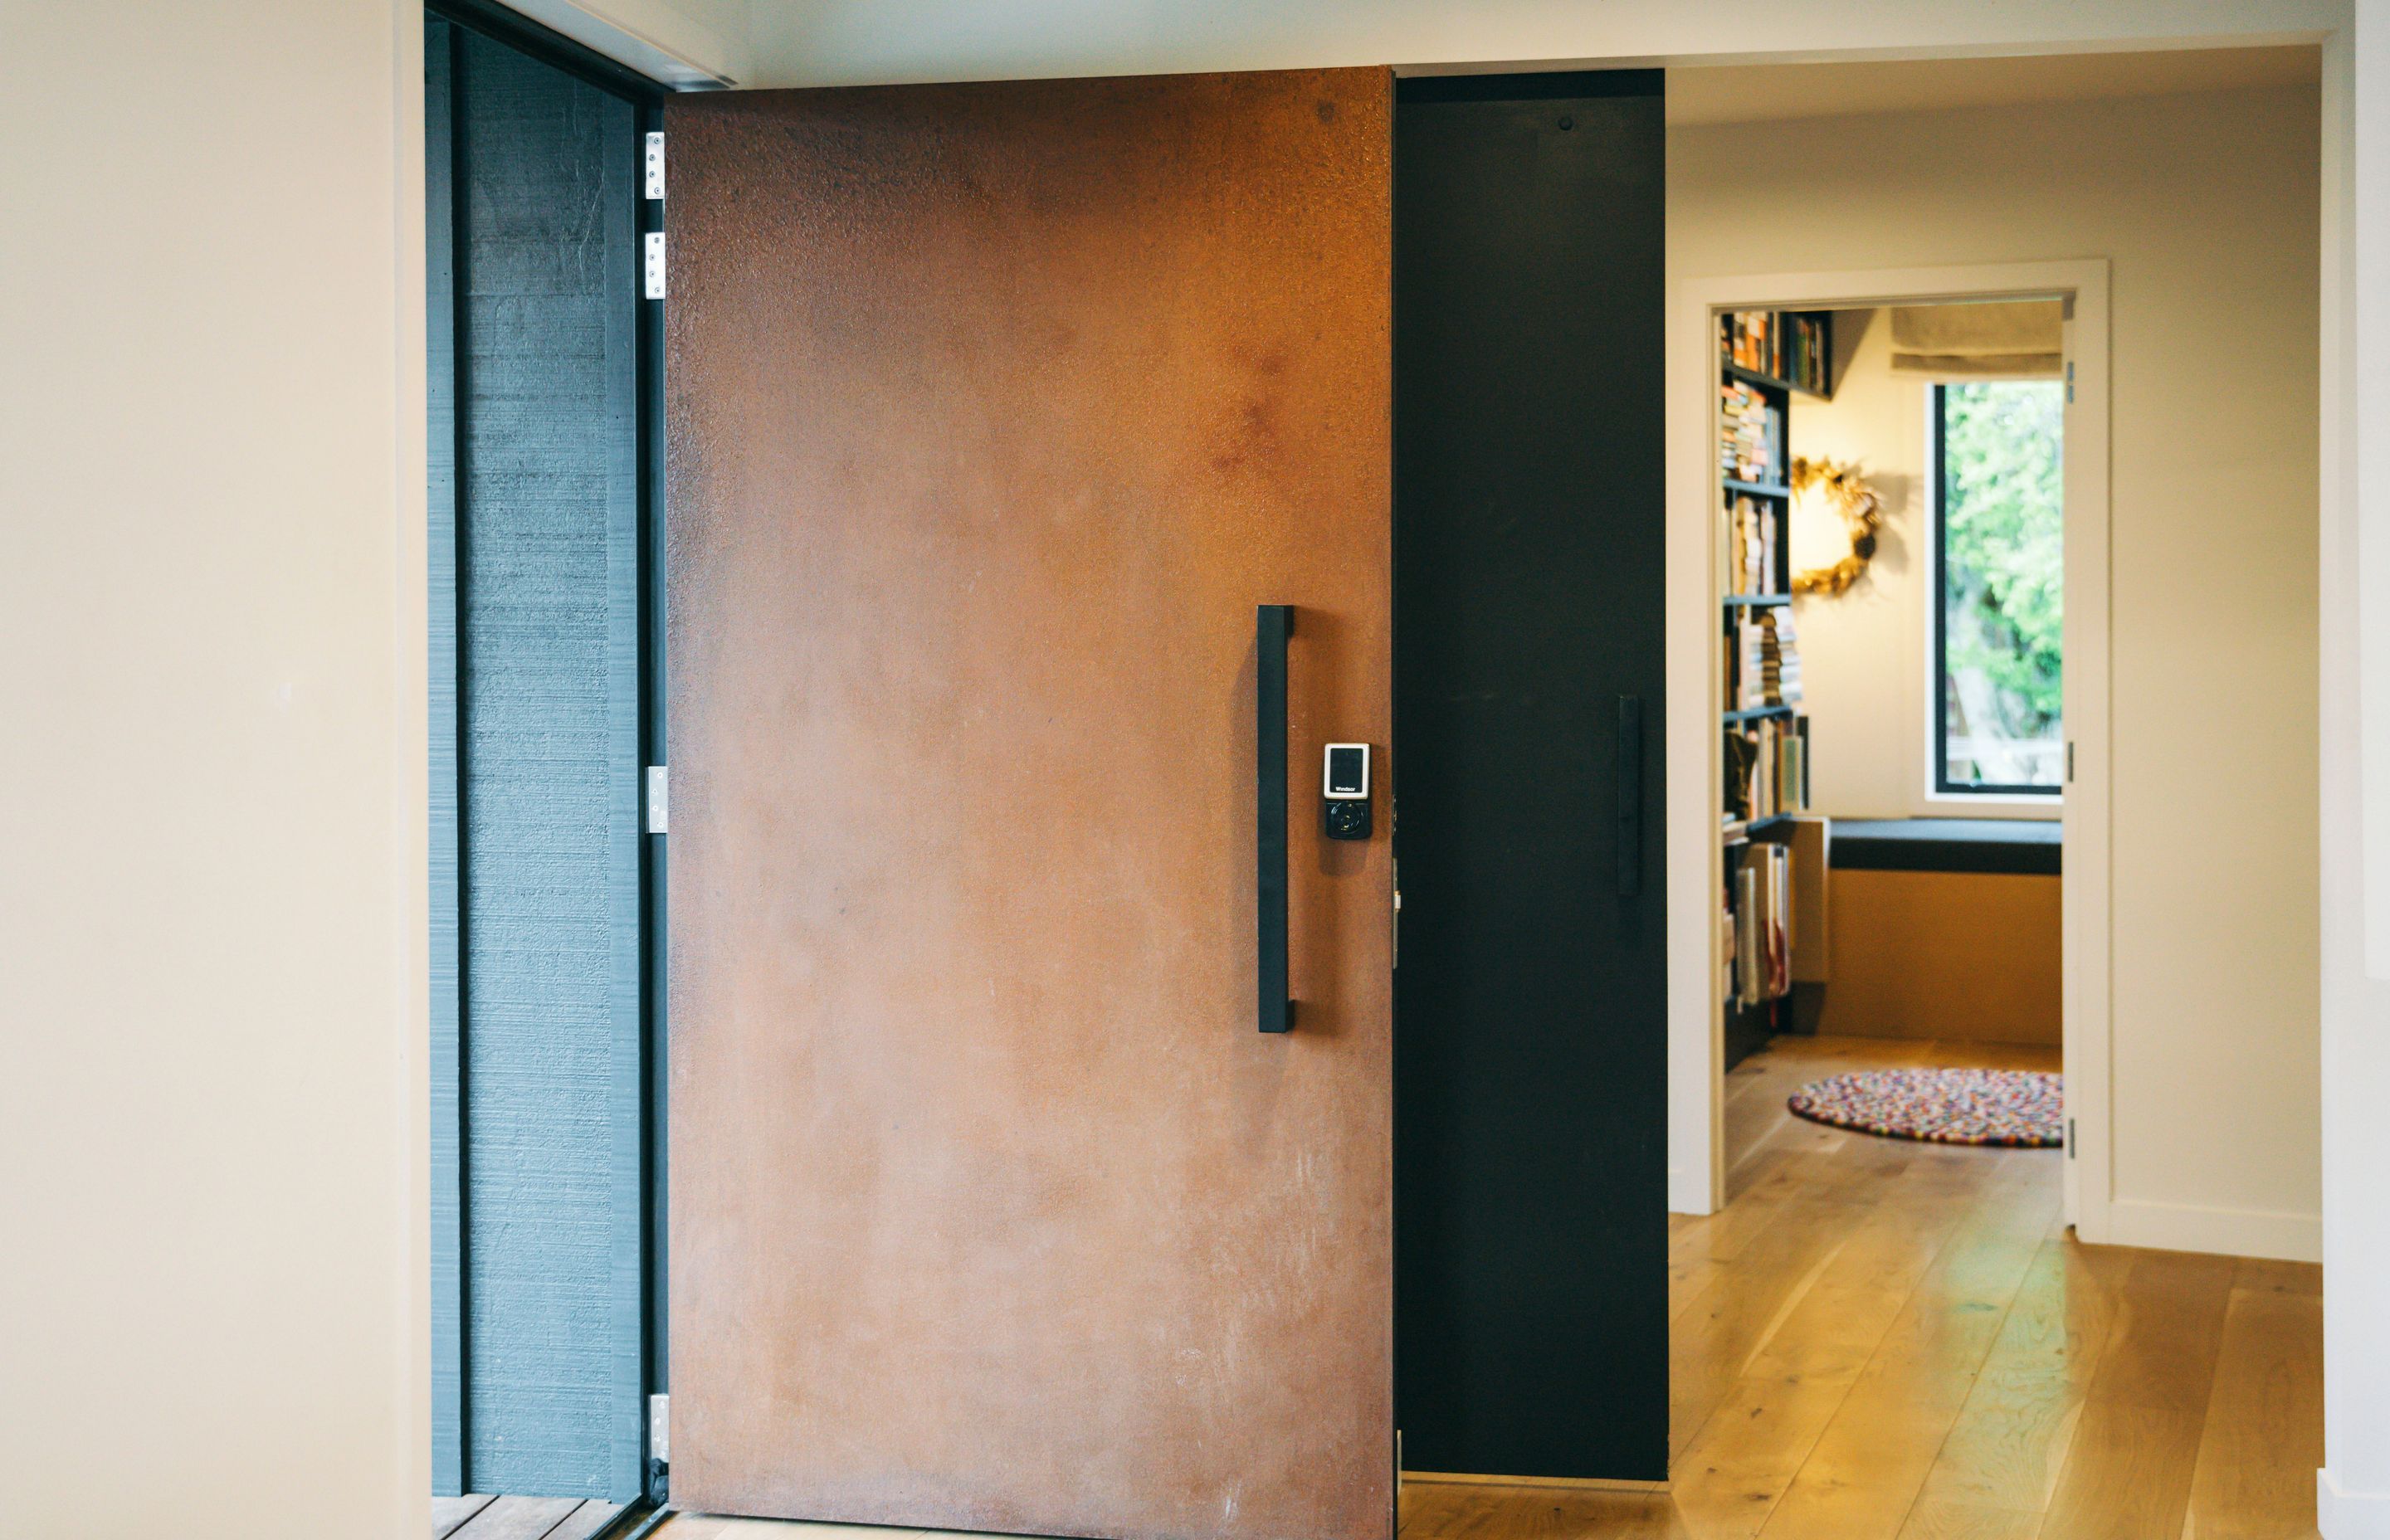 A corten steel door complements the new, contemporary feel of the home and is a bold counterpoint to the black board and batten caldding.